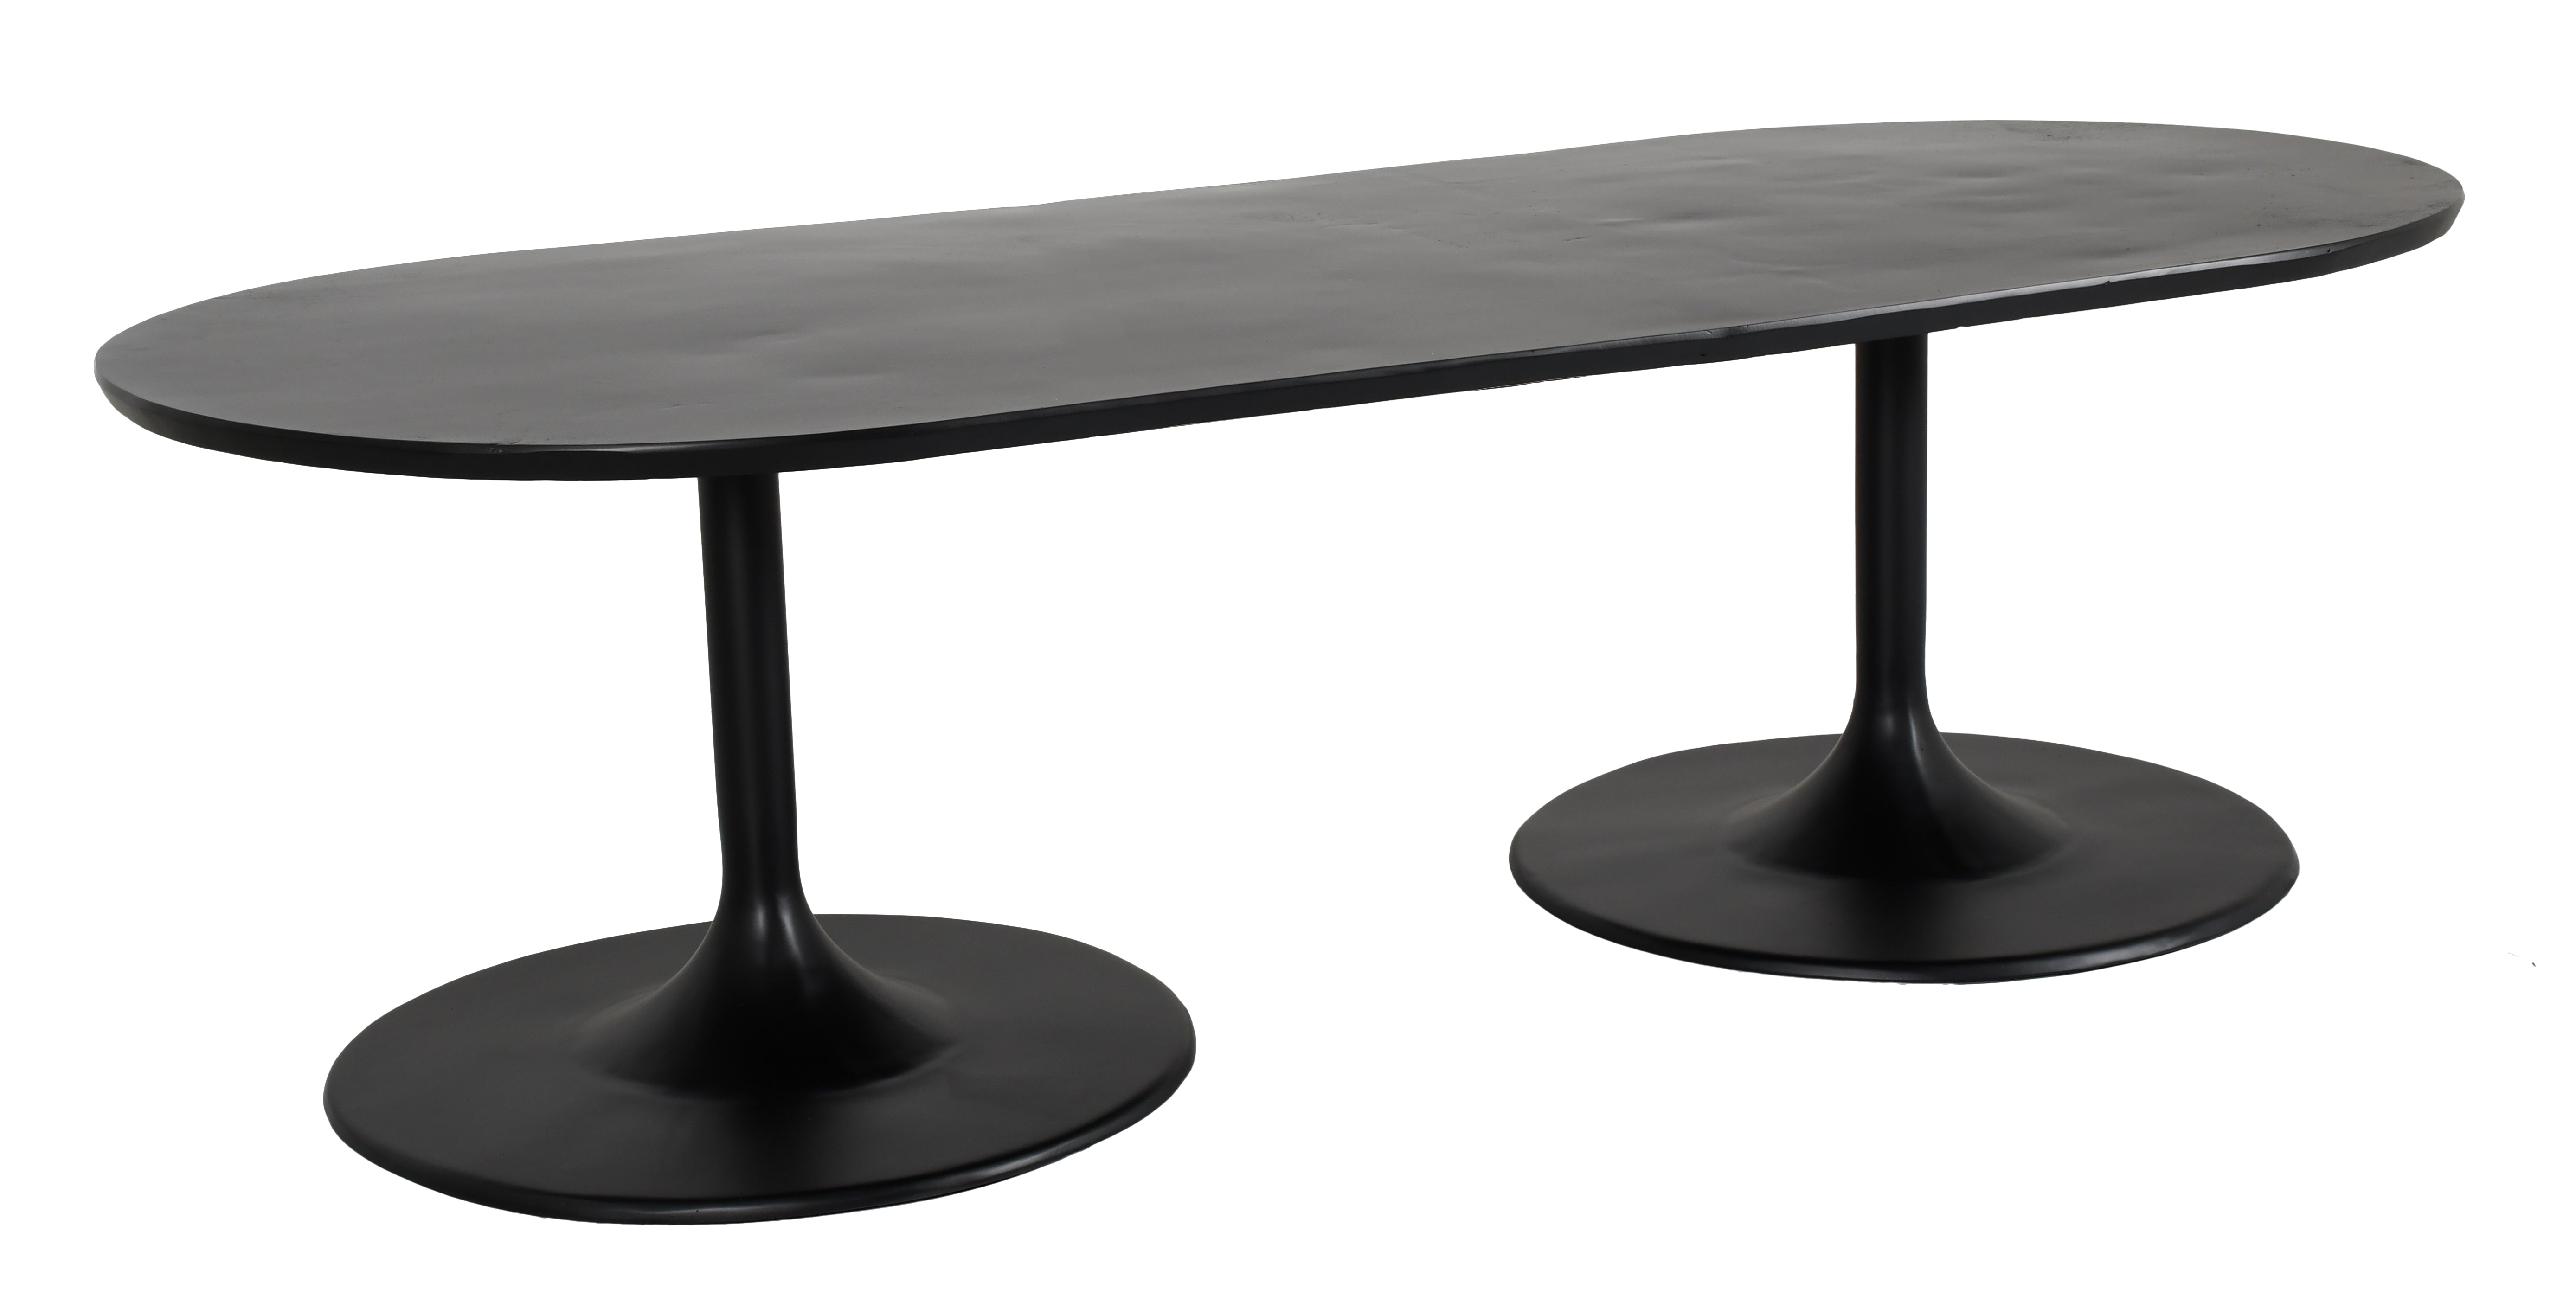 Tulip 108" Oval Dining Table By Castelle